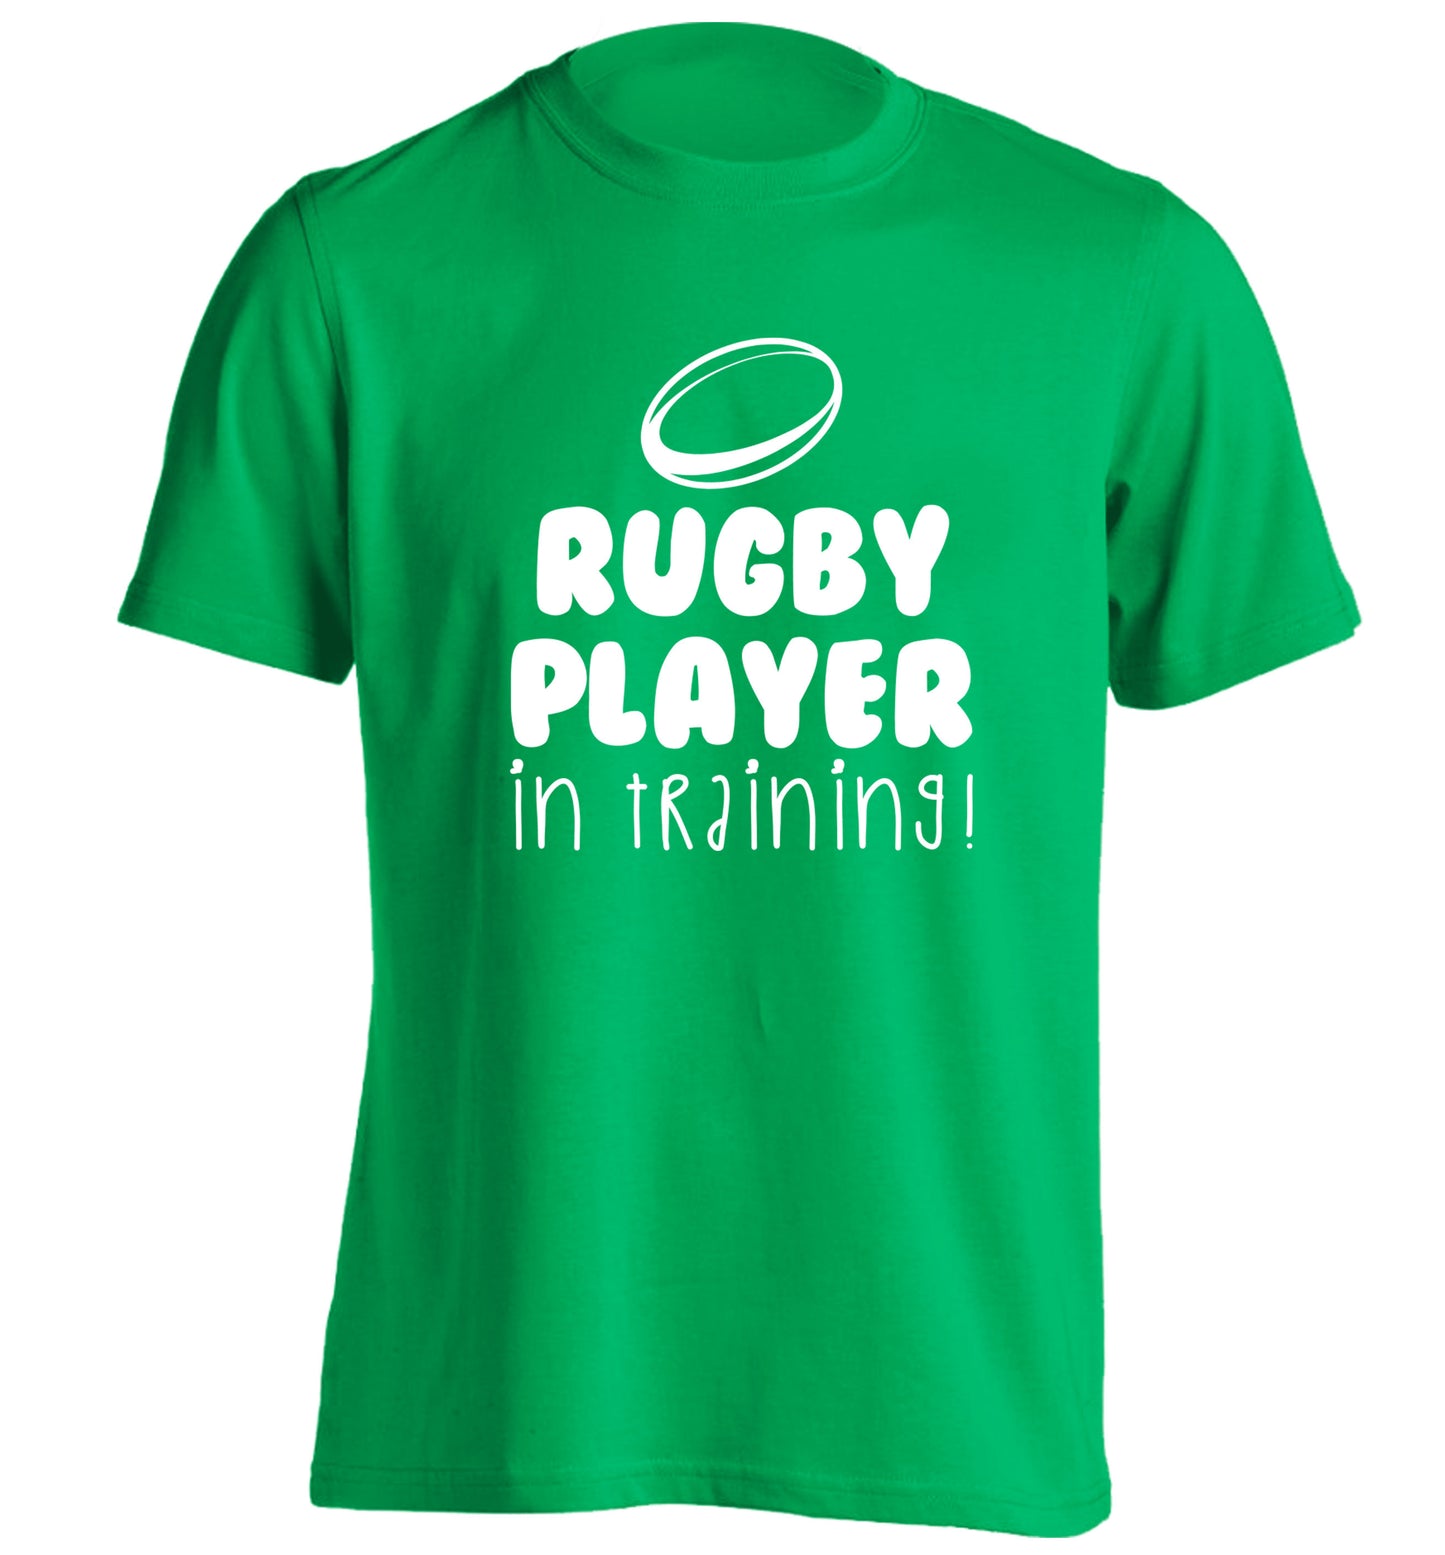 Rugby player in training adults unisex green Tshirt 2XL